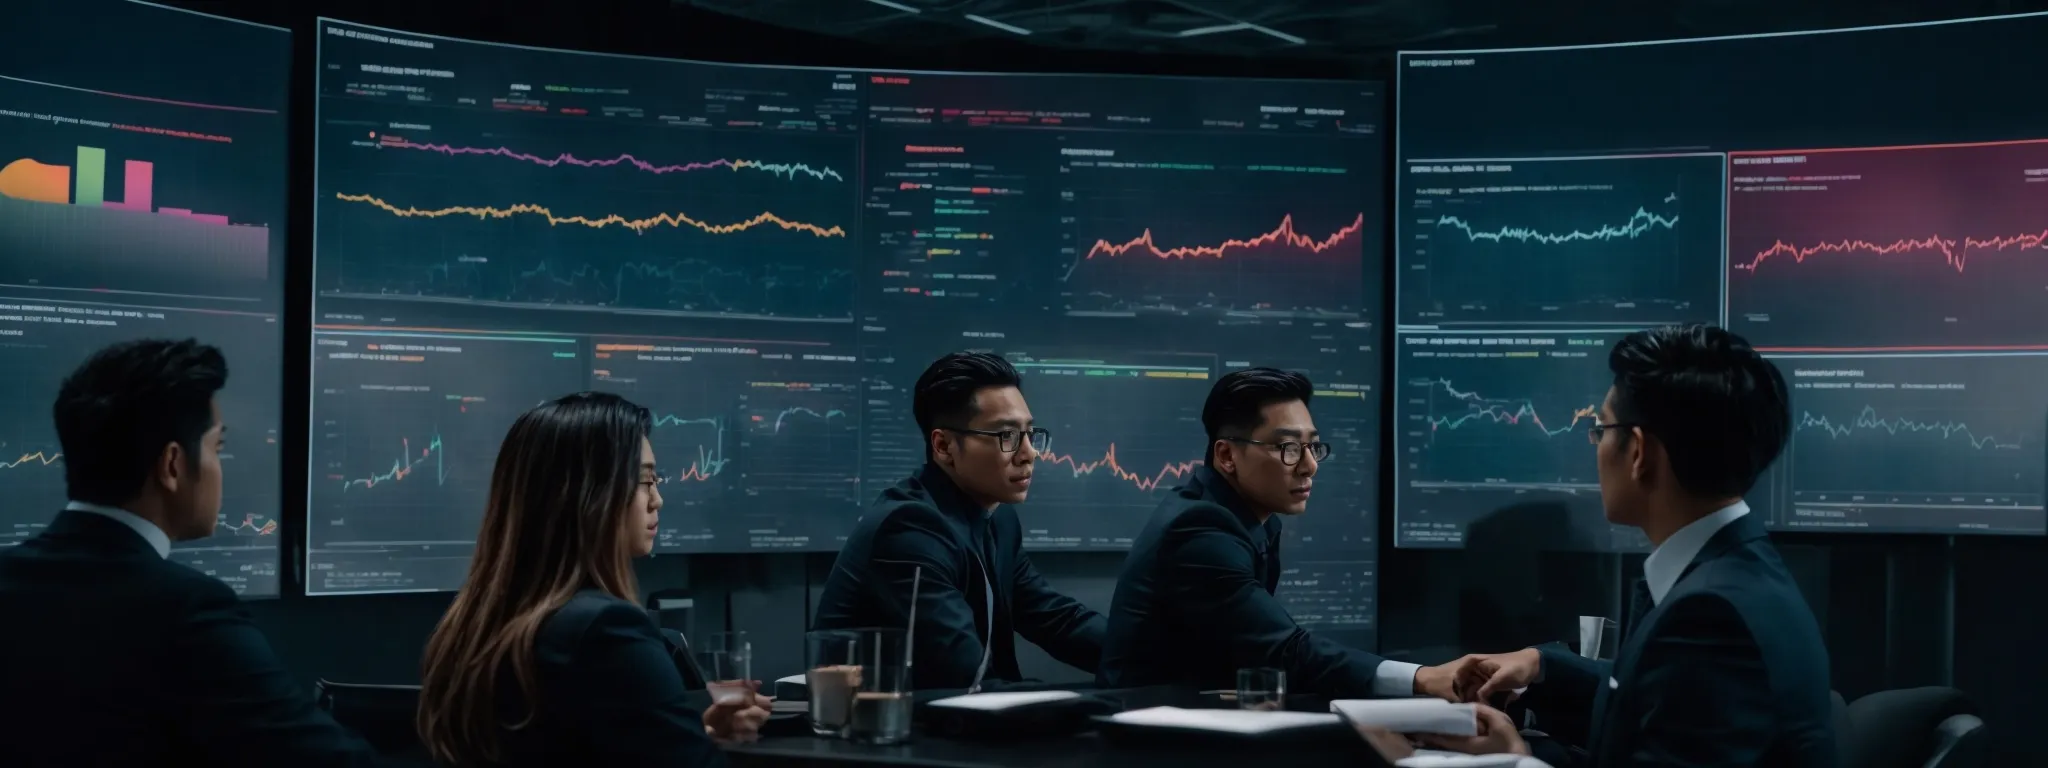 a team of professionals discusses around a big screen displaying colorful graphs and analytics dashboards, symbolizing data-driven seo strategies.